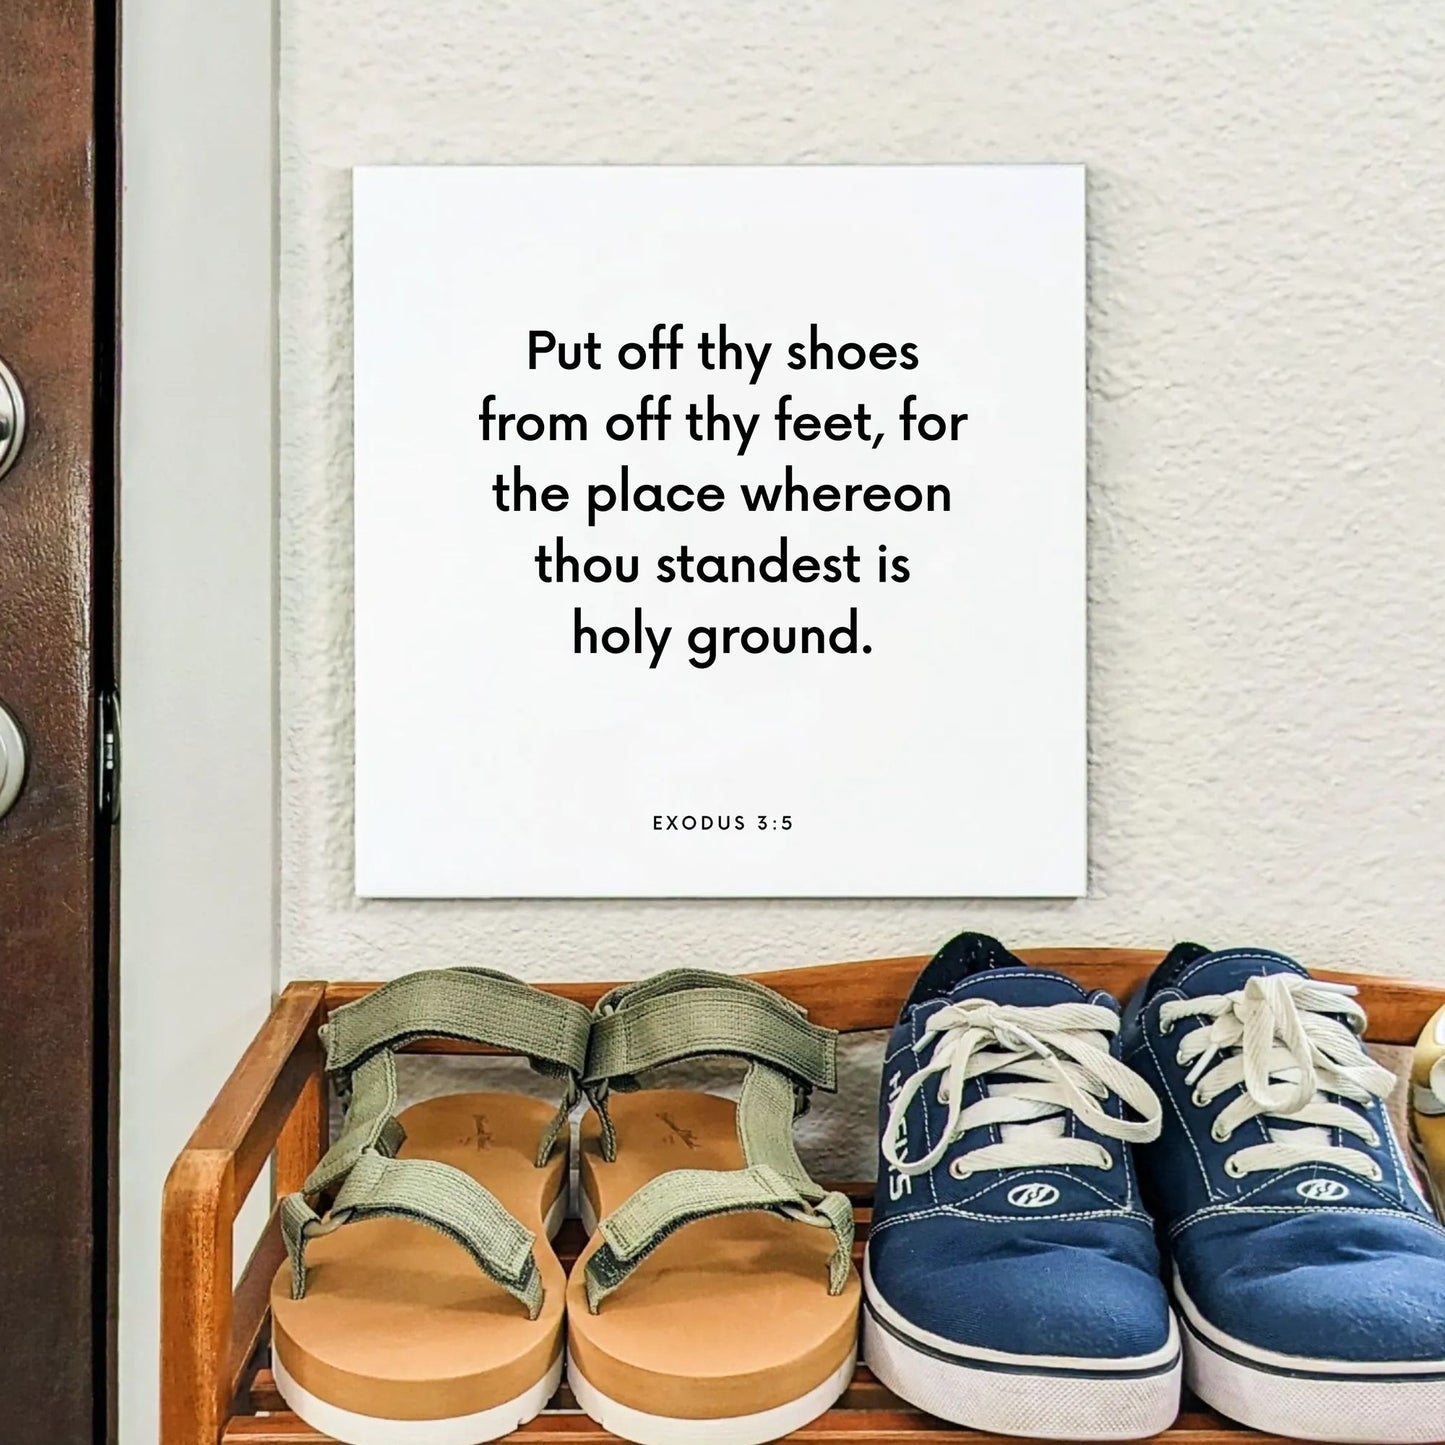 Shoes mouting of the scripture tile for Exodus 3:5 - "Put off thy shoes from off thy feet"